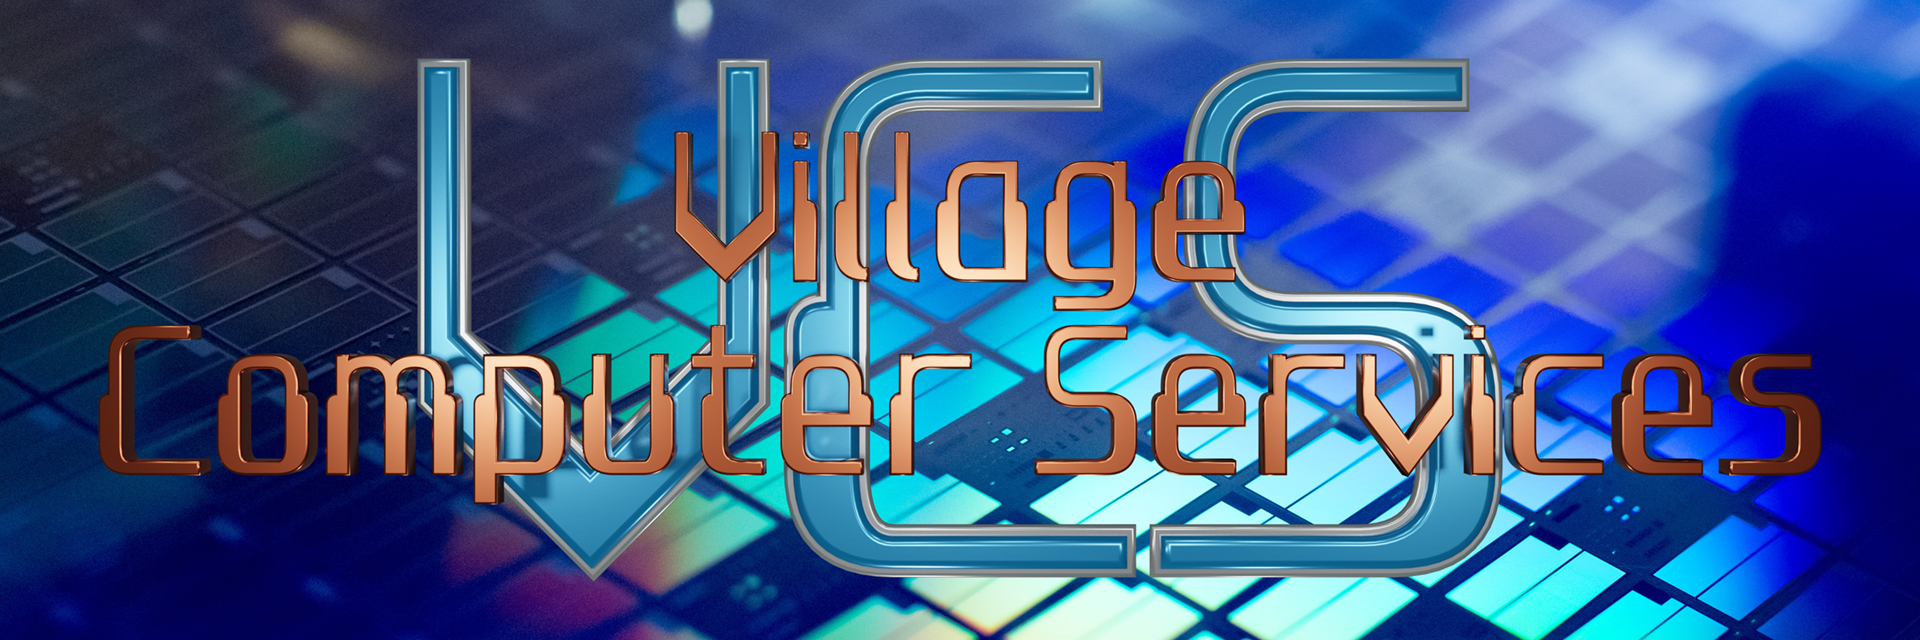 Village Computer Services  Offering professional personal and business  computer support since 1981.